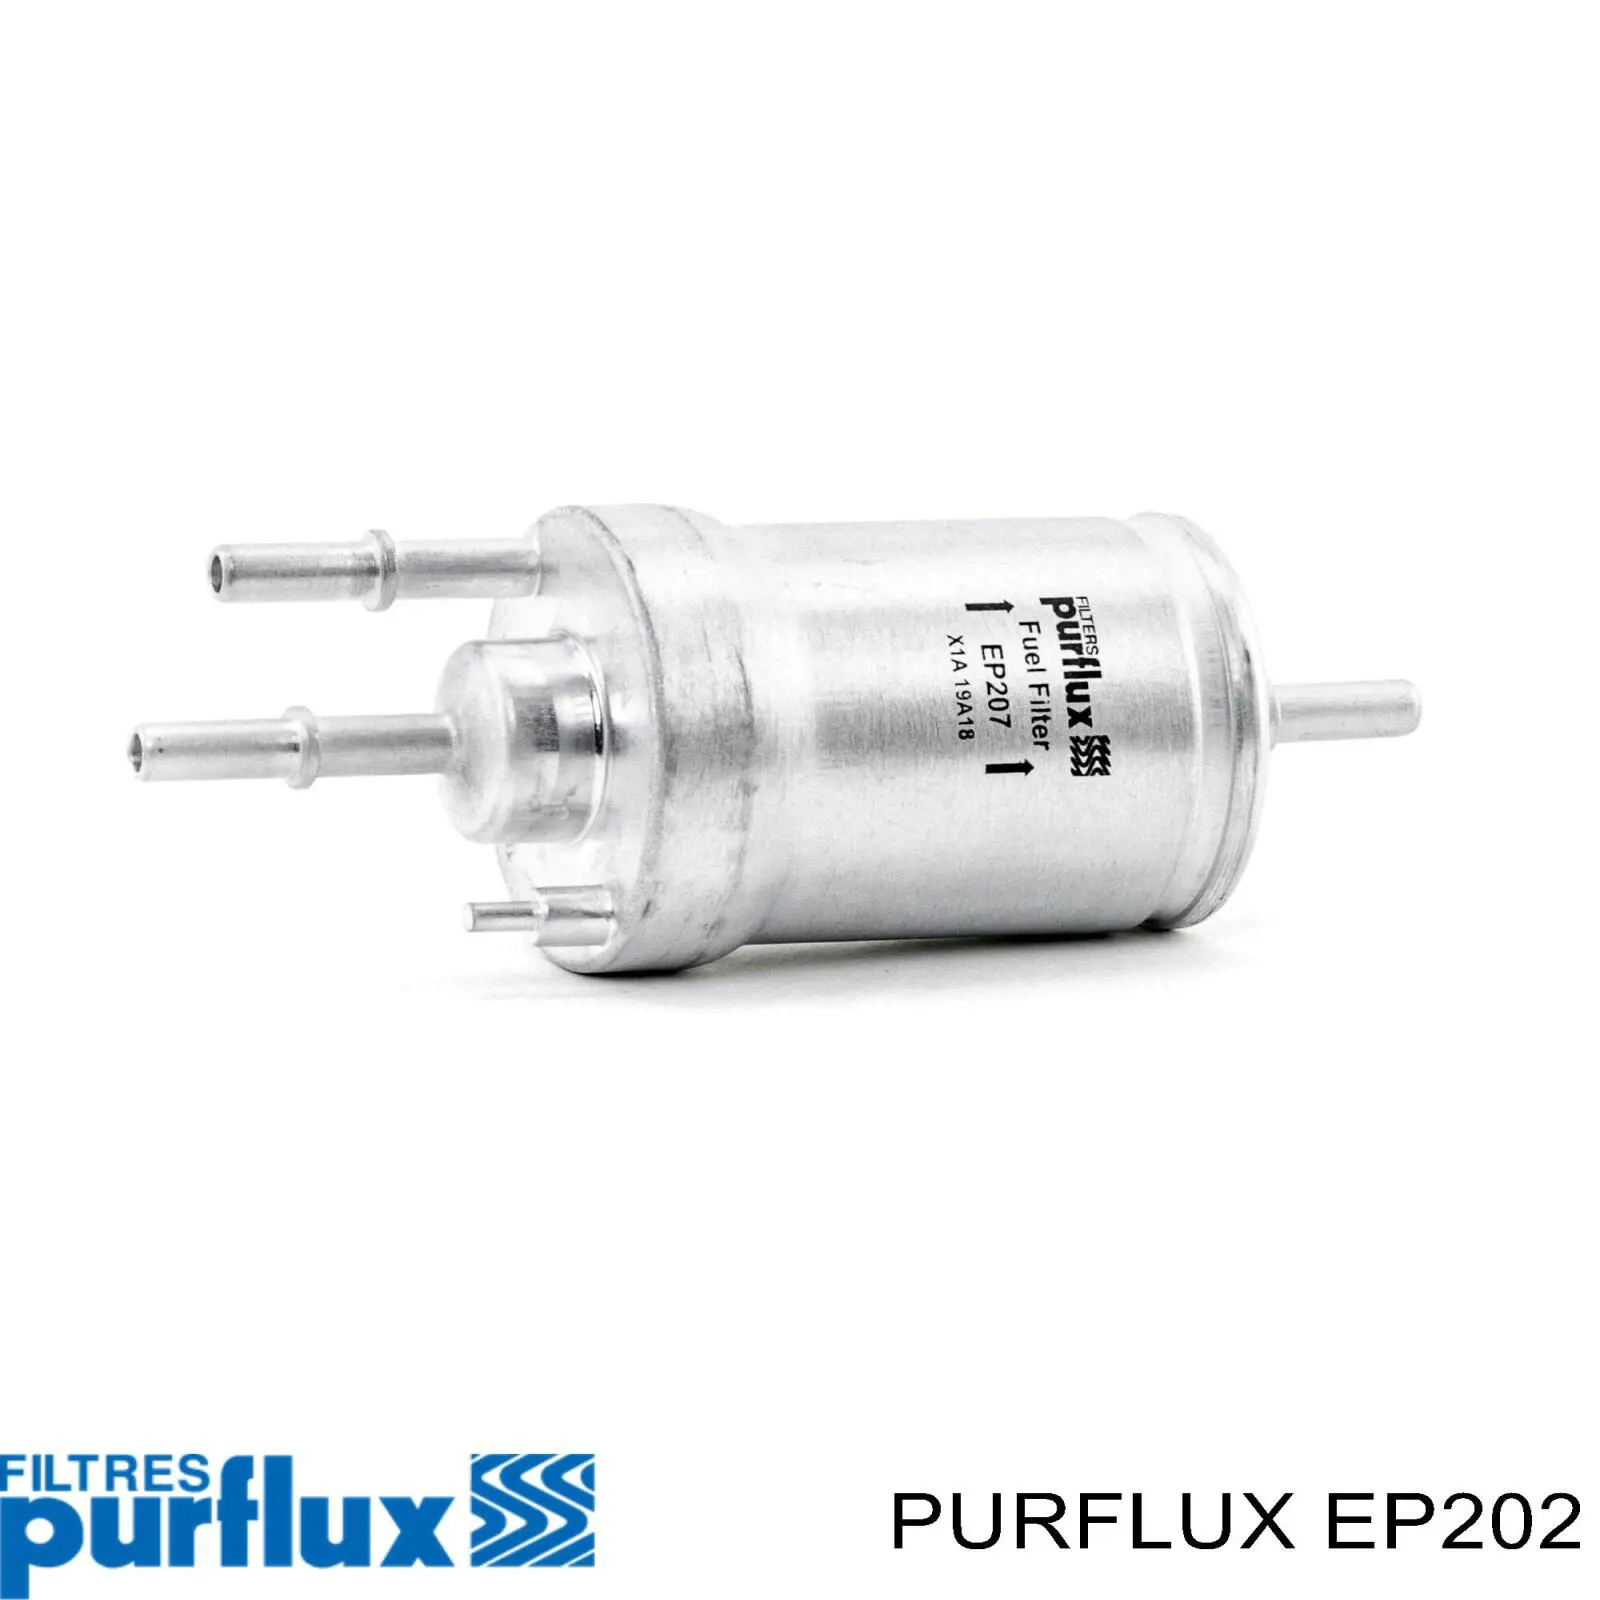 EP202 Purflux filtro combustible